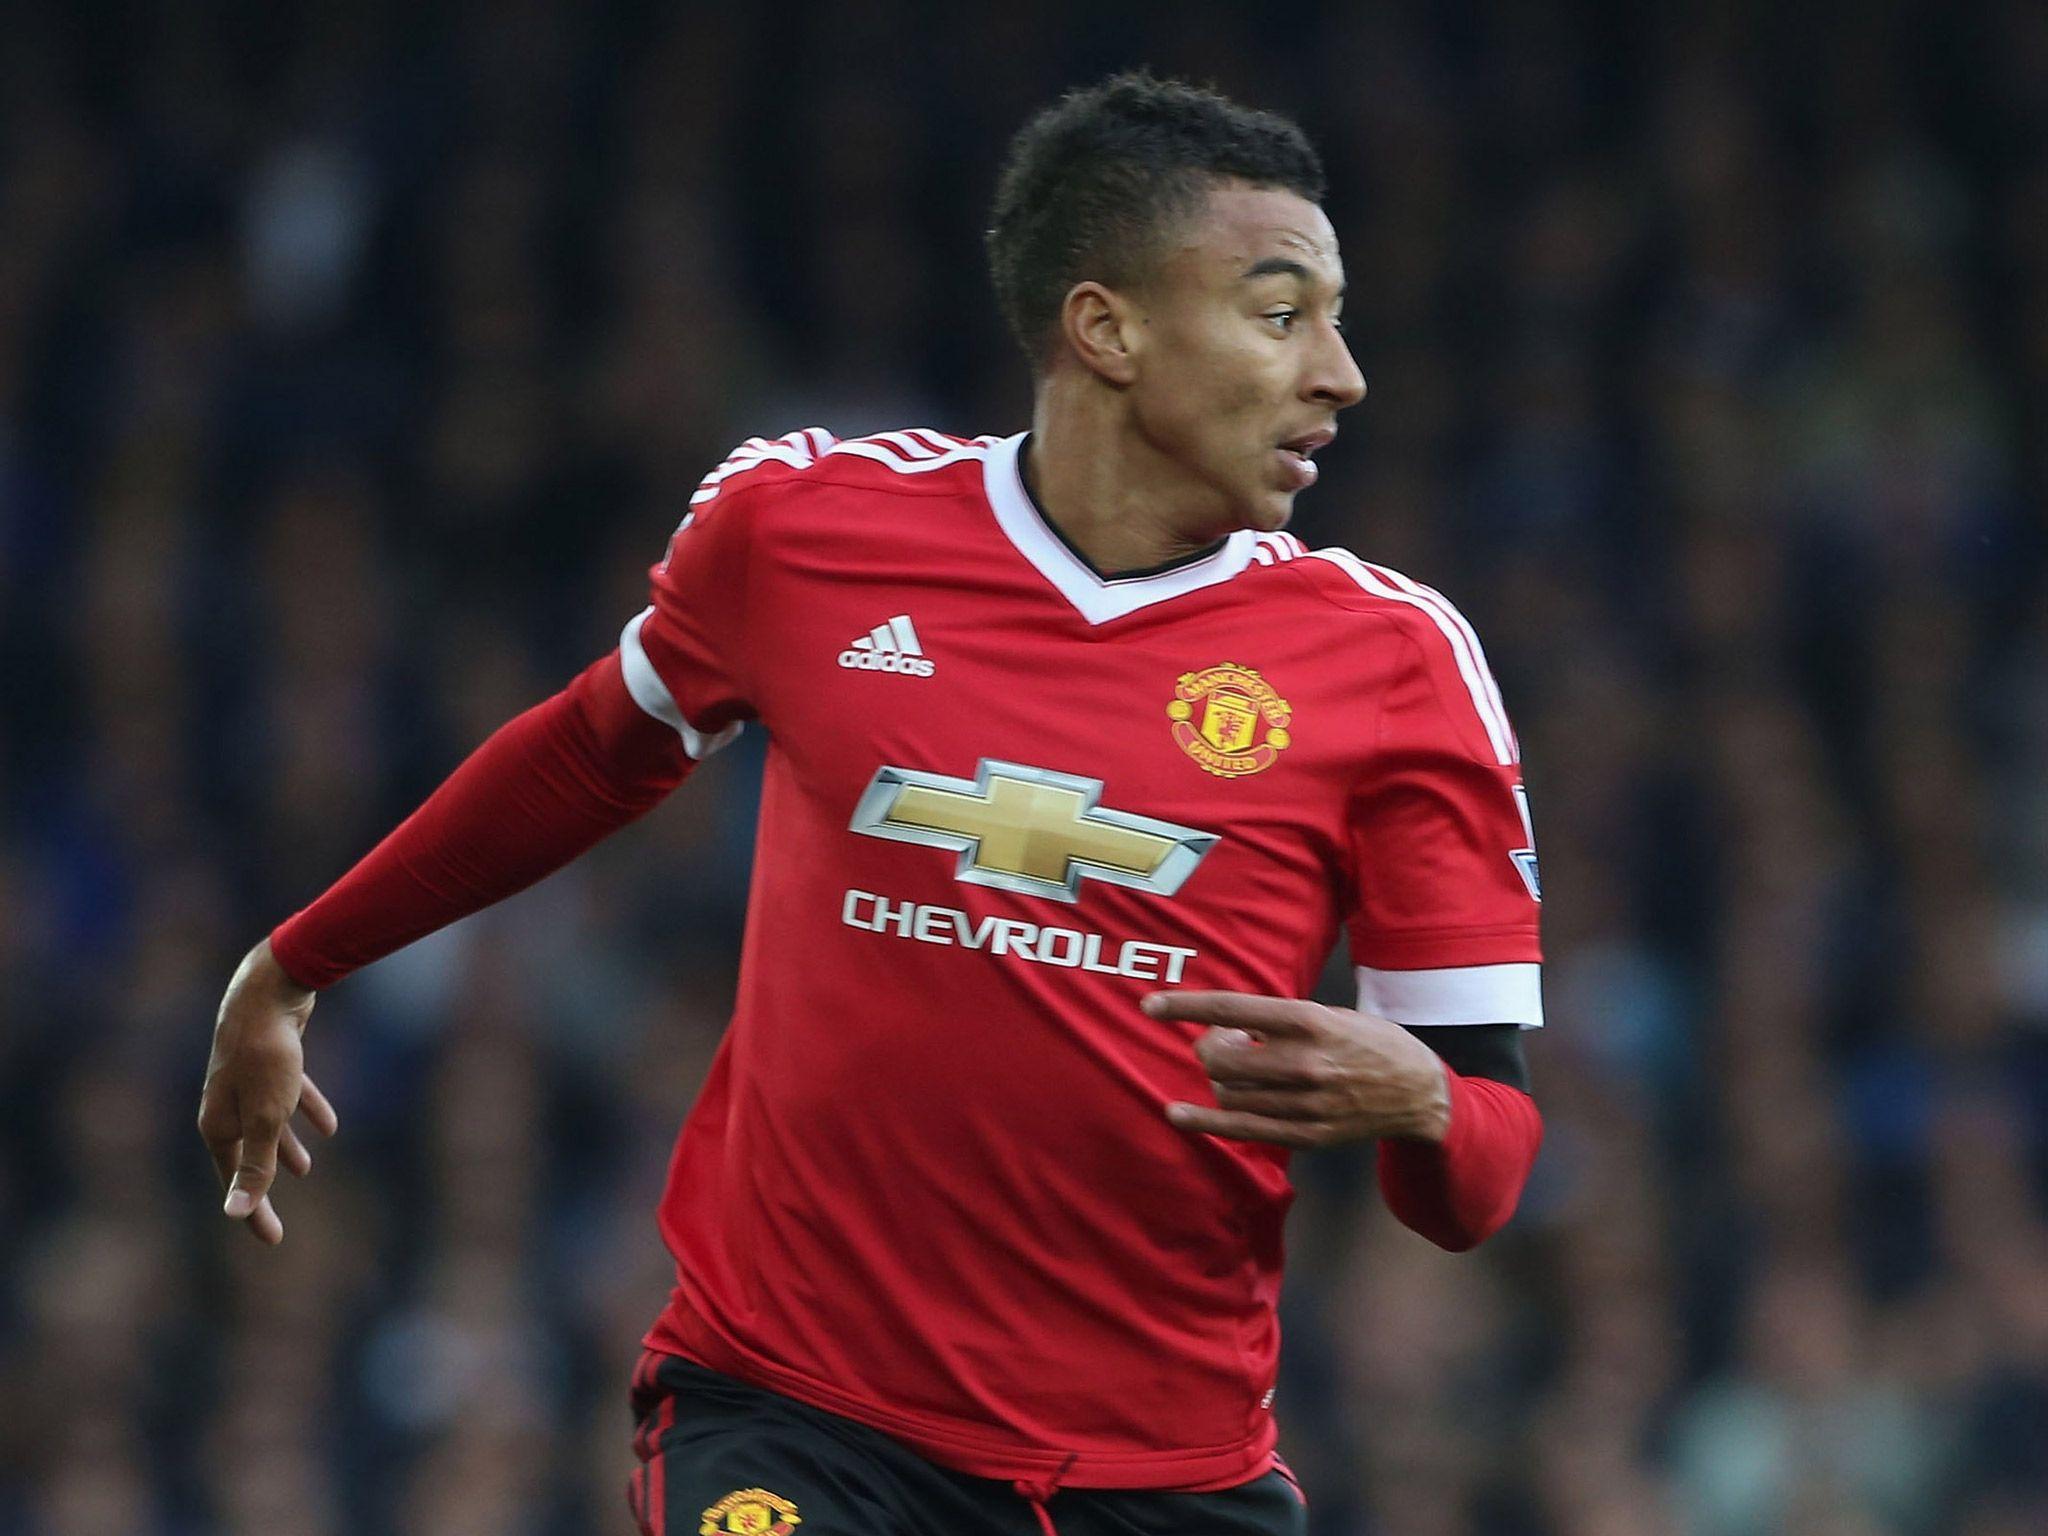 Manchester United fans react to Jesse Lingard's Champions League